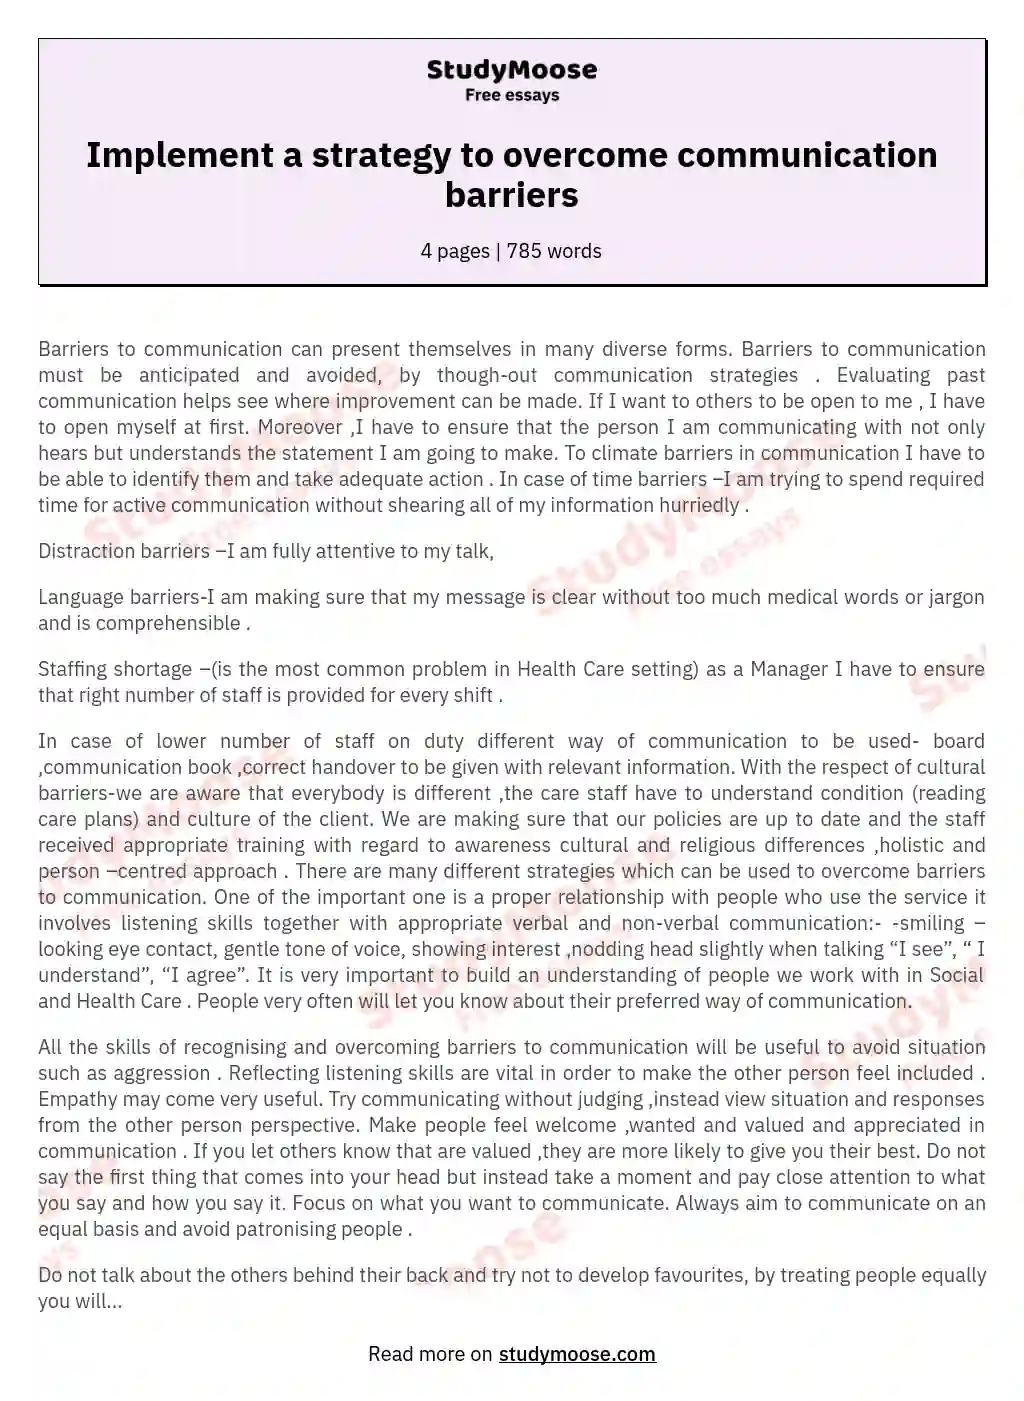 Implement a strategy to overcome communication barriers essay